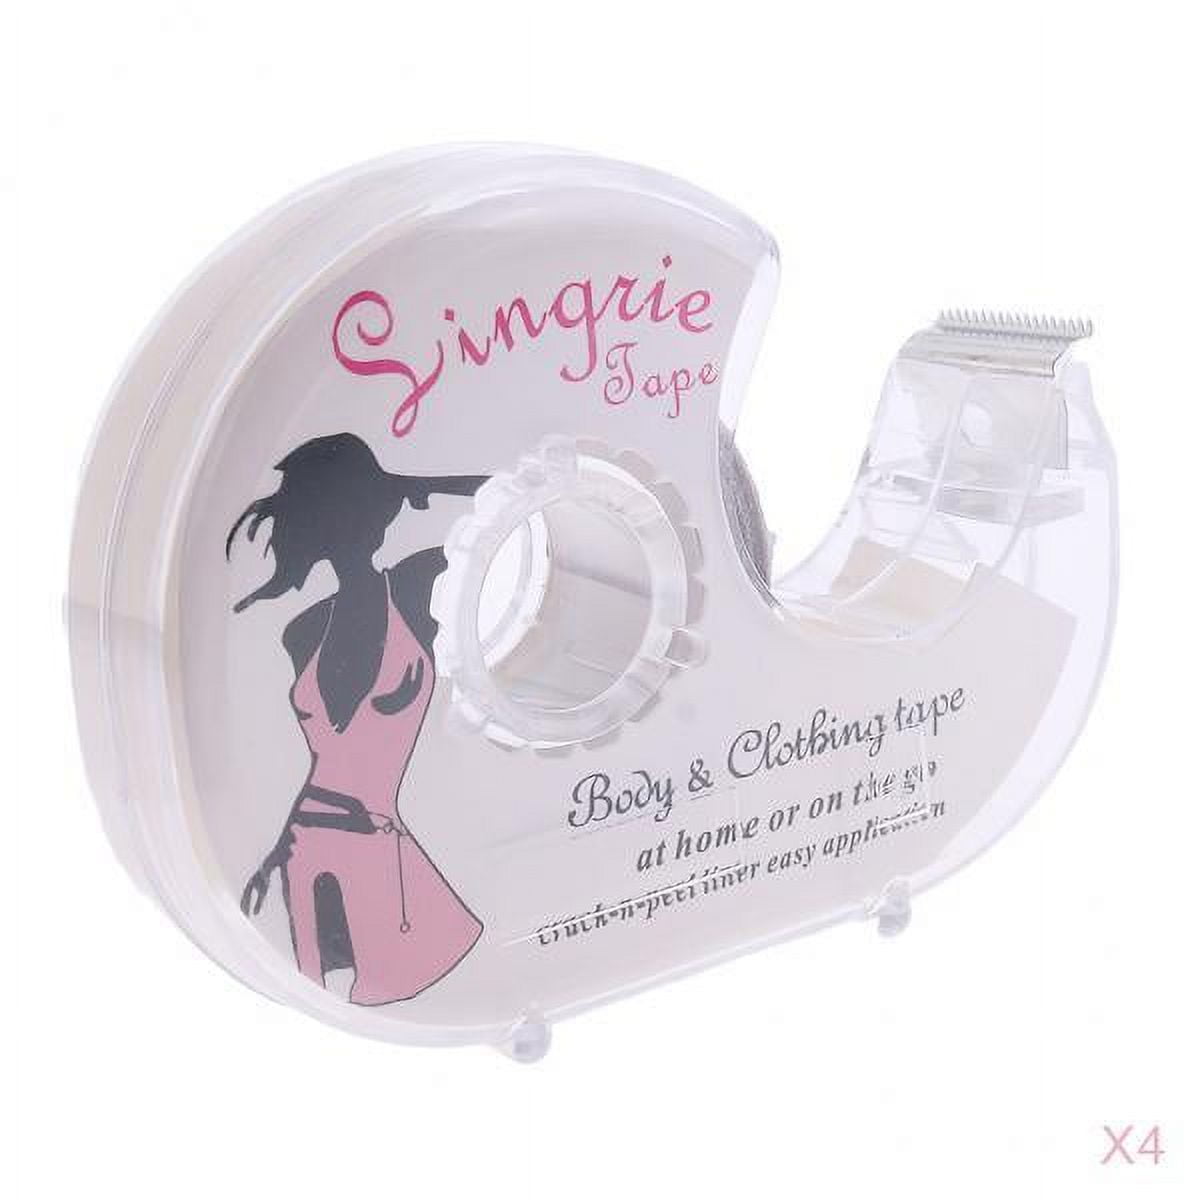 50pcs Transparent Lingerie Tape To Prevent Slipping And Secure Clothing,  Double Sided Adhesive Bra Tape To Avoid Embarrassing Exposures